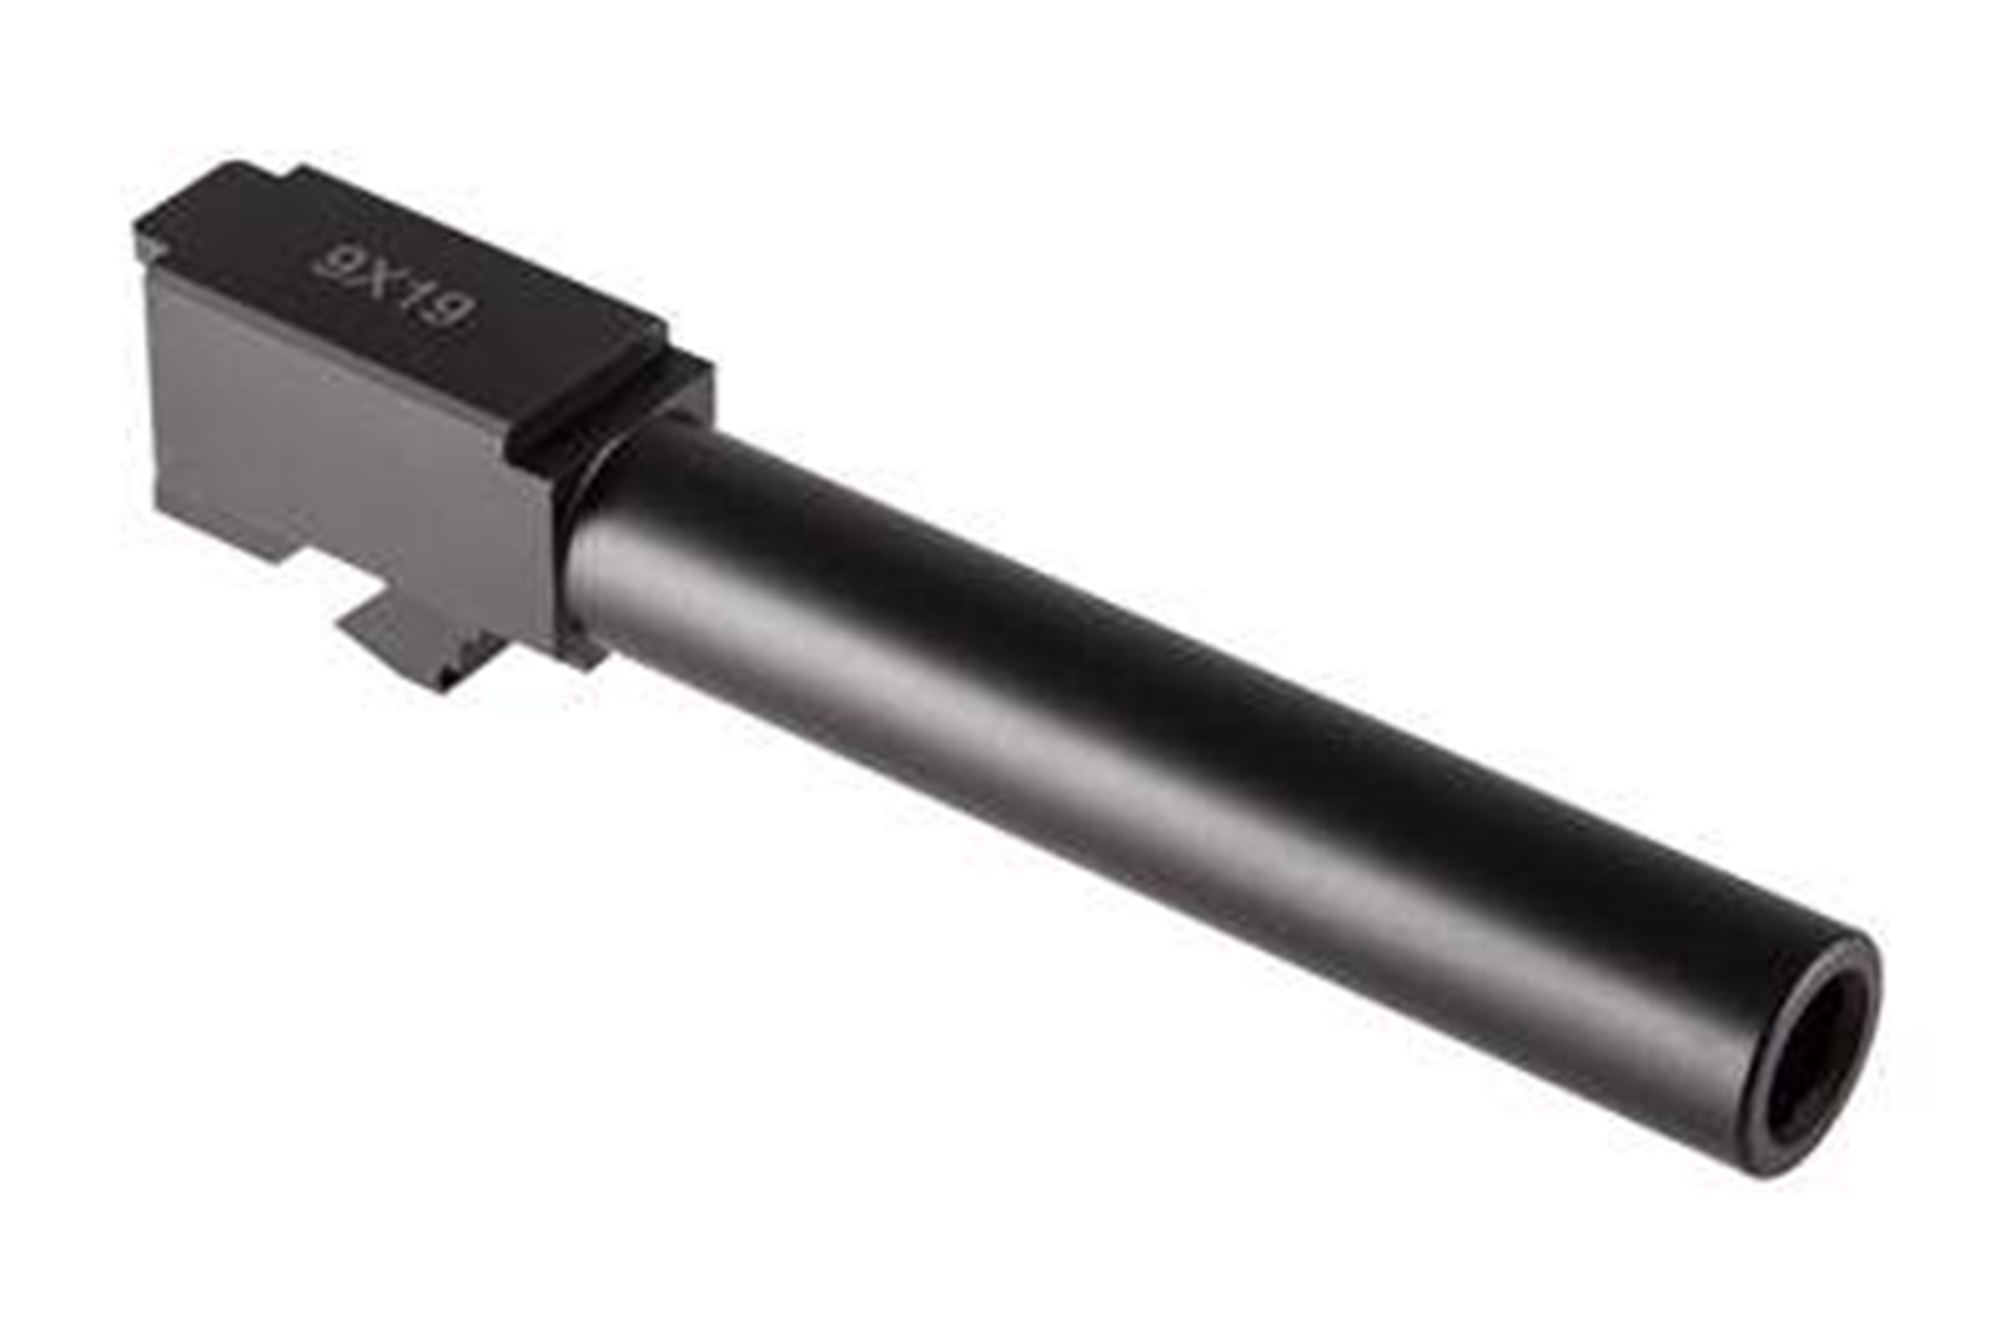 #078-000-384 Brownells Extended Barrel for Glock 19, threaded. 